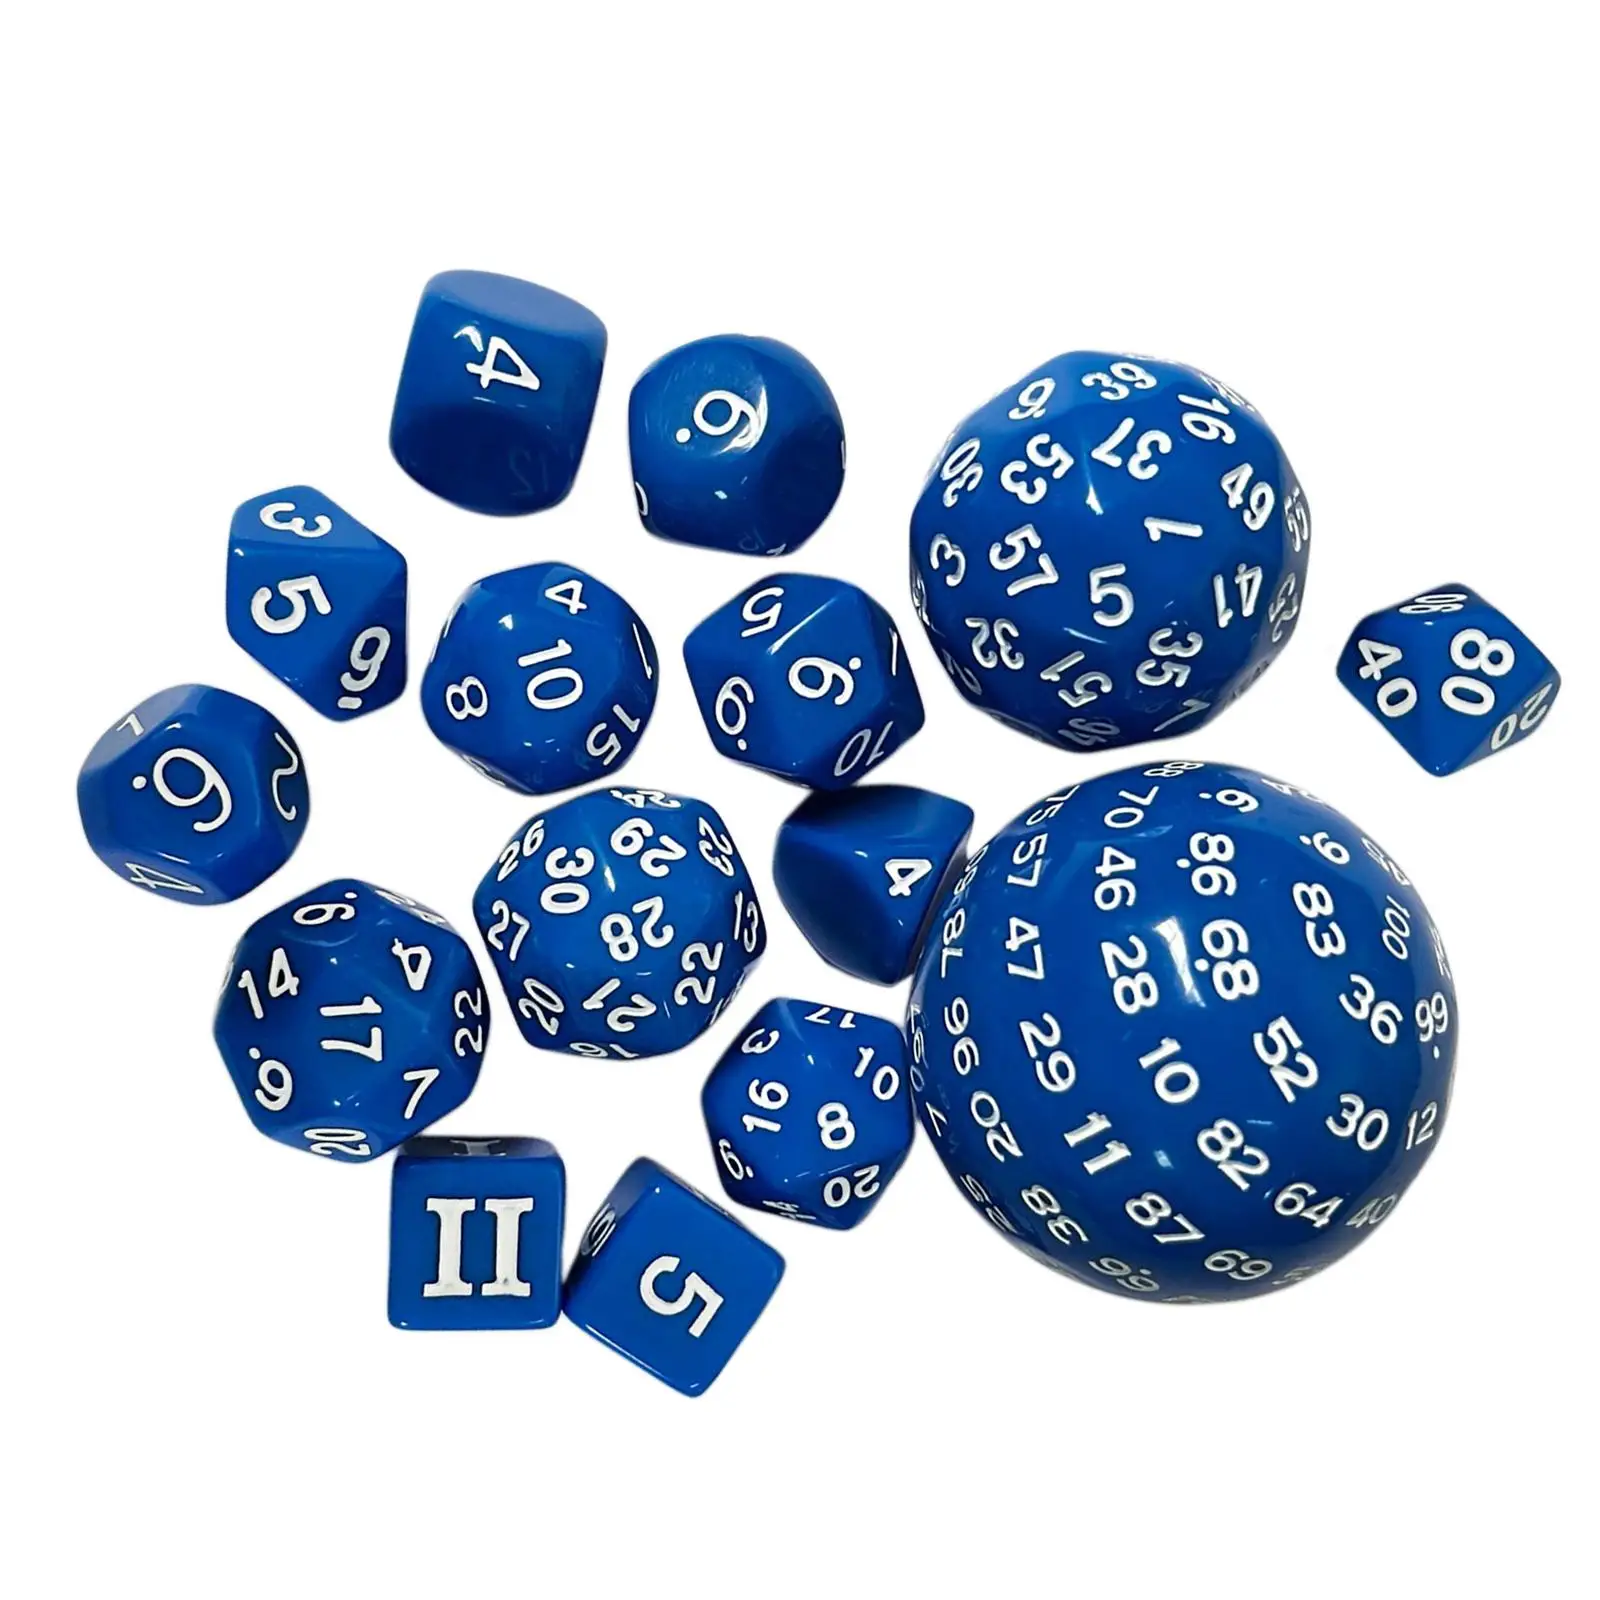 15 Pieces D100 D60 D30 D24 D20 D16 D12 D10 D8 D7 D5 D4 Dice Set Dice Game RPG Role Playing for Board Game Role Playing